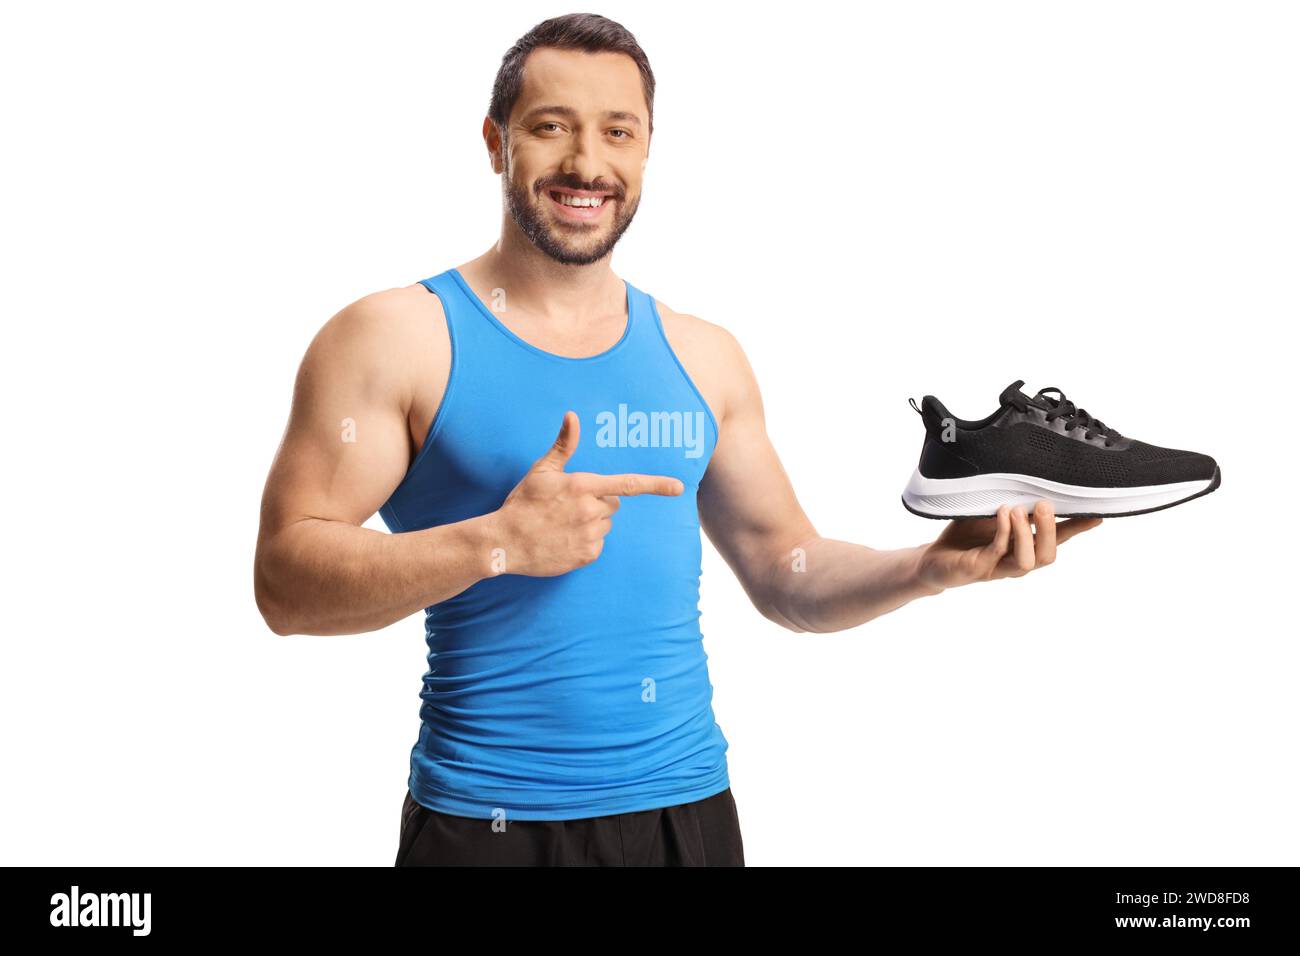 Male athlete holding a trainer sport shoe and pointing isolated on white background Stock Photo